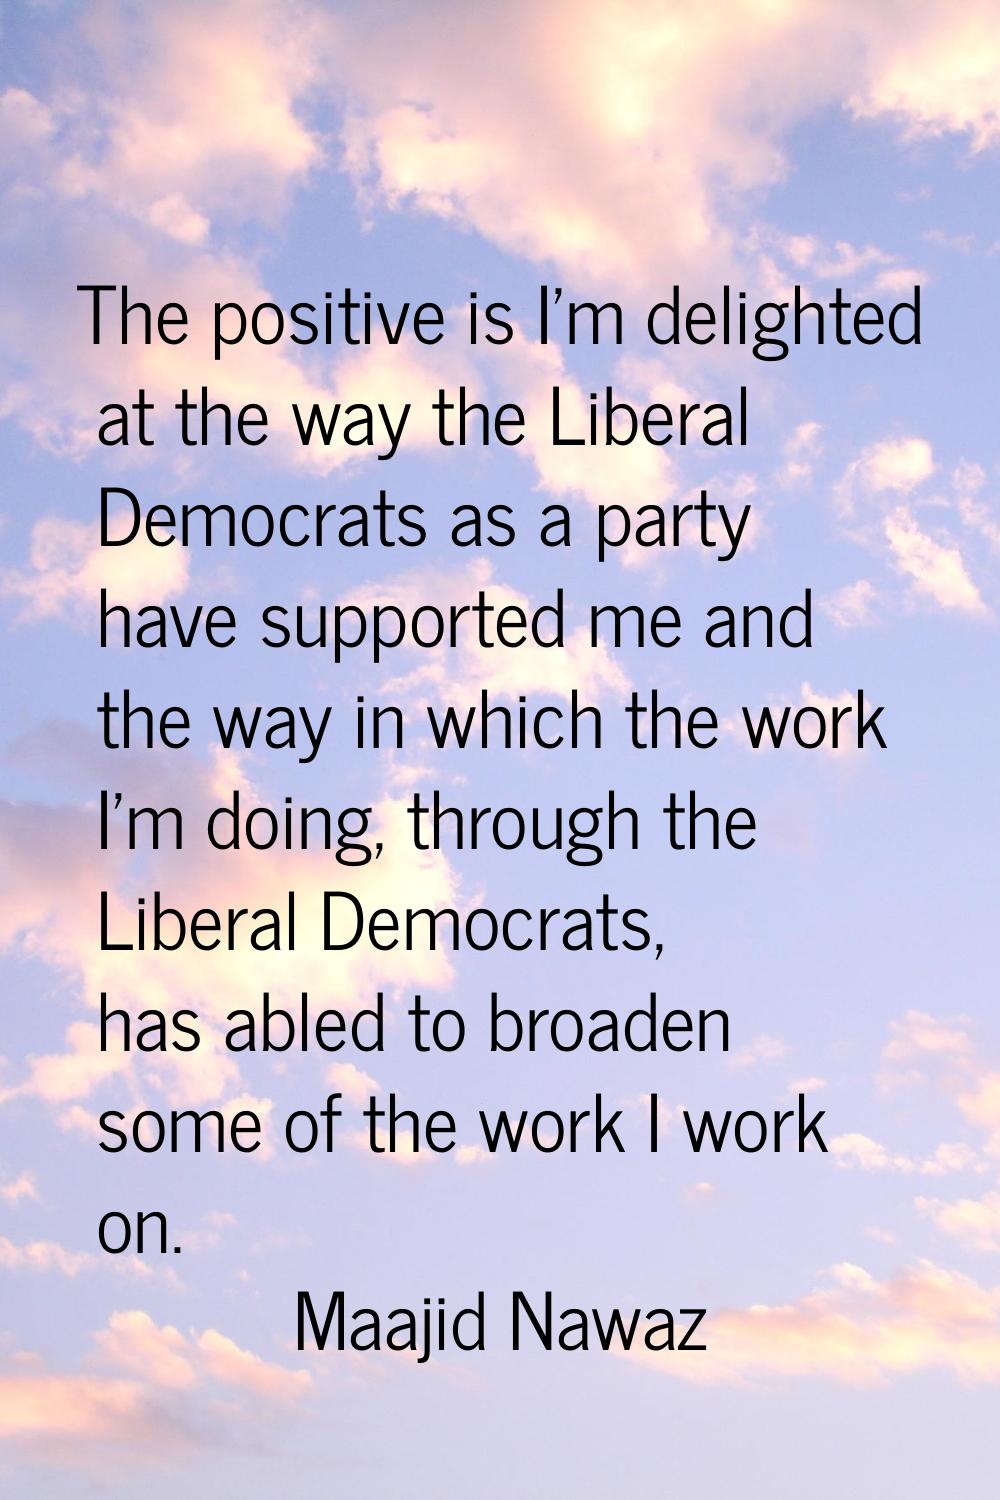 The positive is I'm delighted at the way the Liberal Democrats as a party have supported me and the